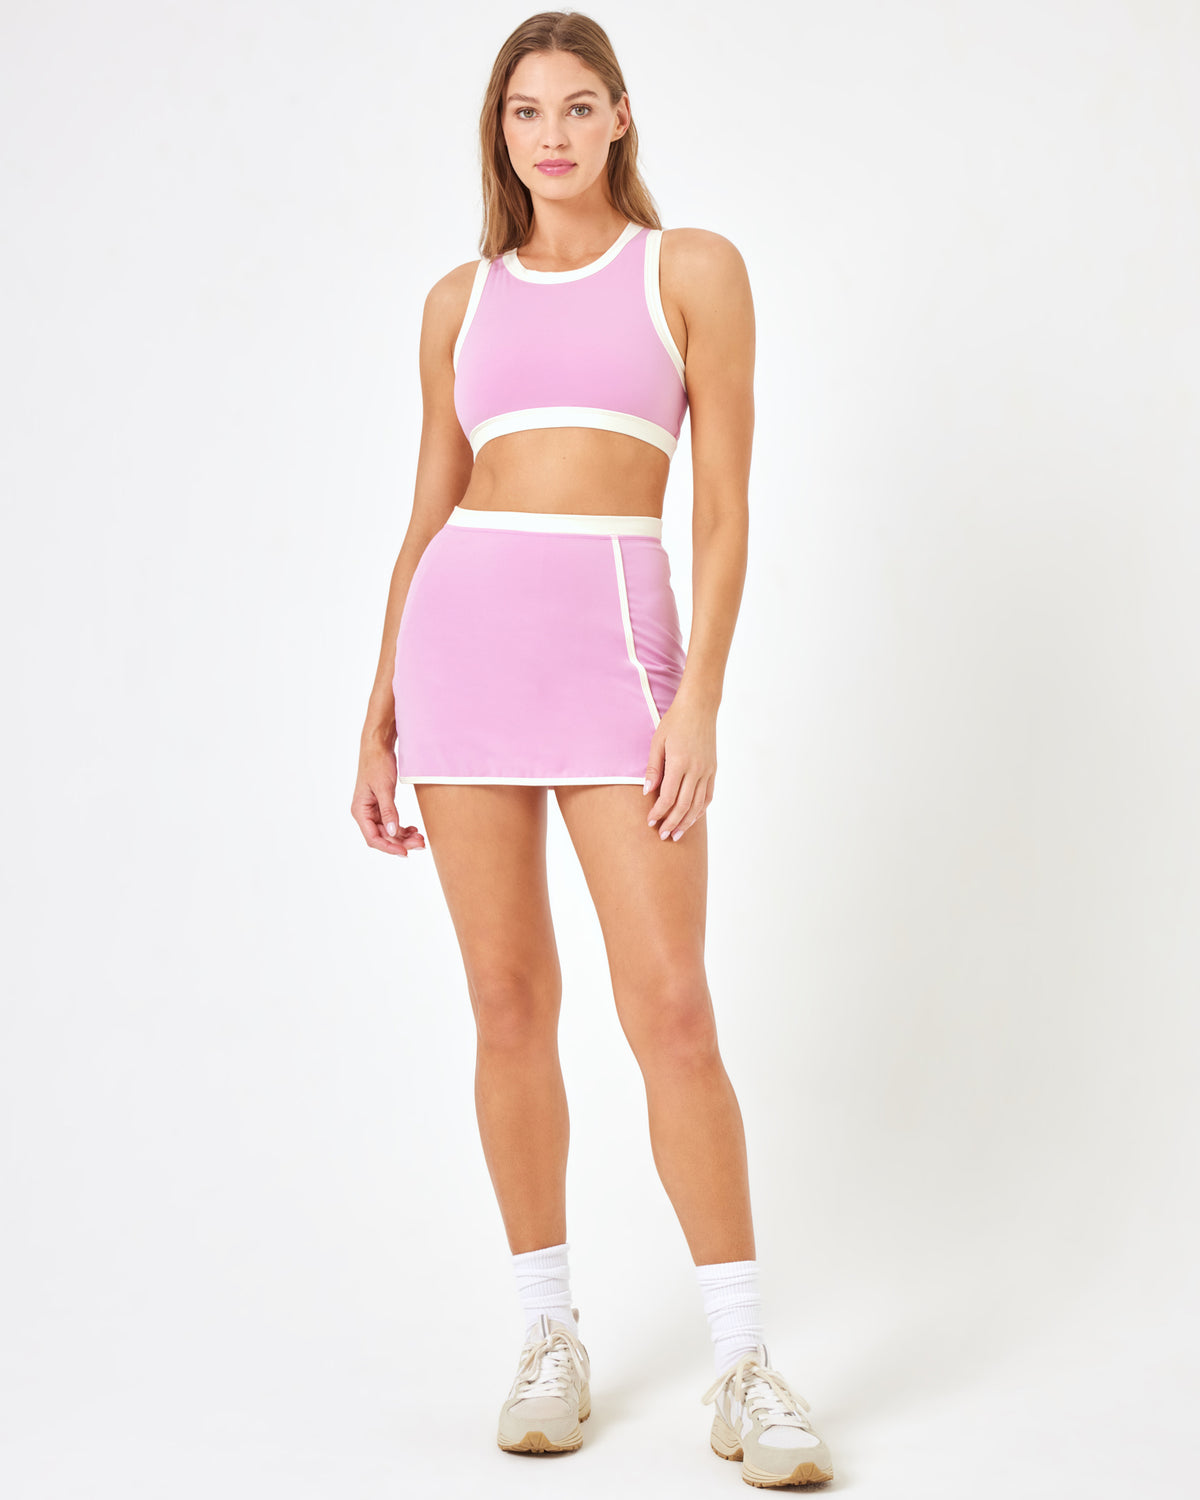 LSPACE X Anthropologie Campbell Skort - Pink Lady Pink Lady | Model: Anna (size: S) | Hover